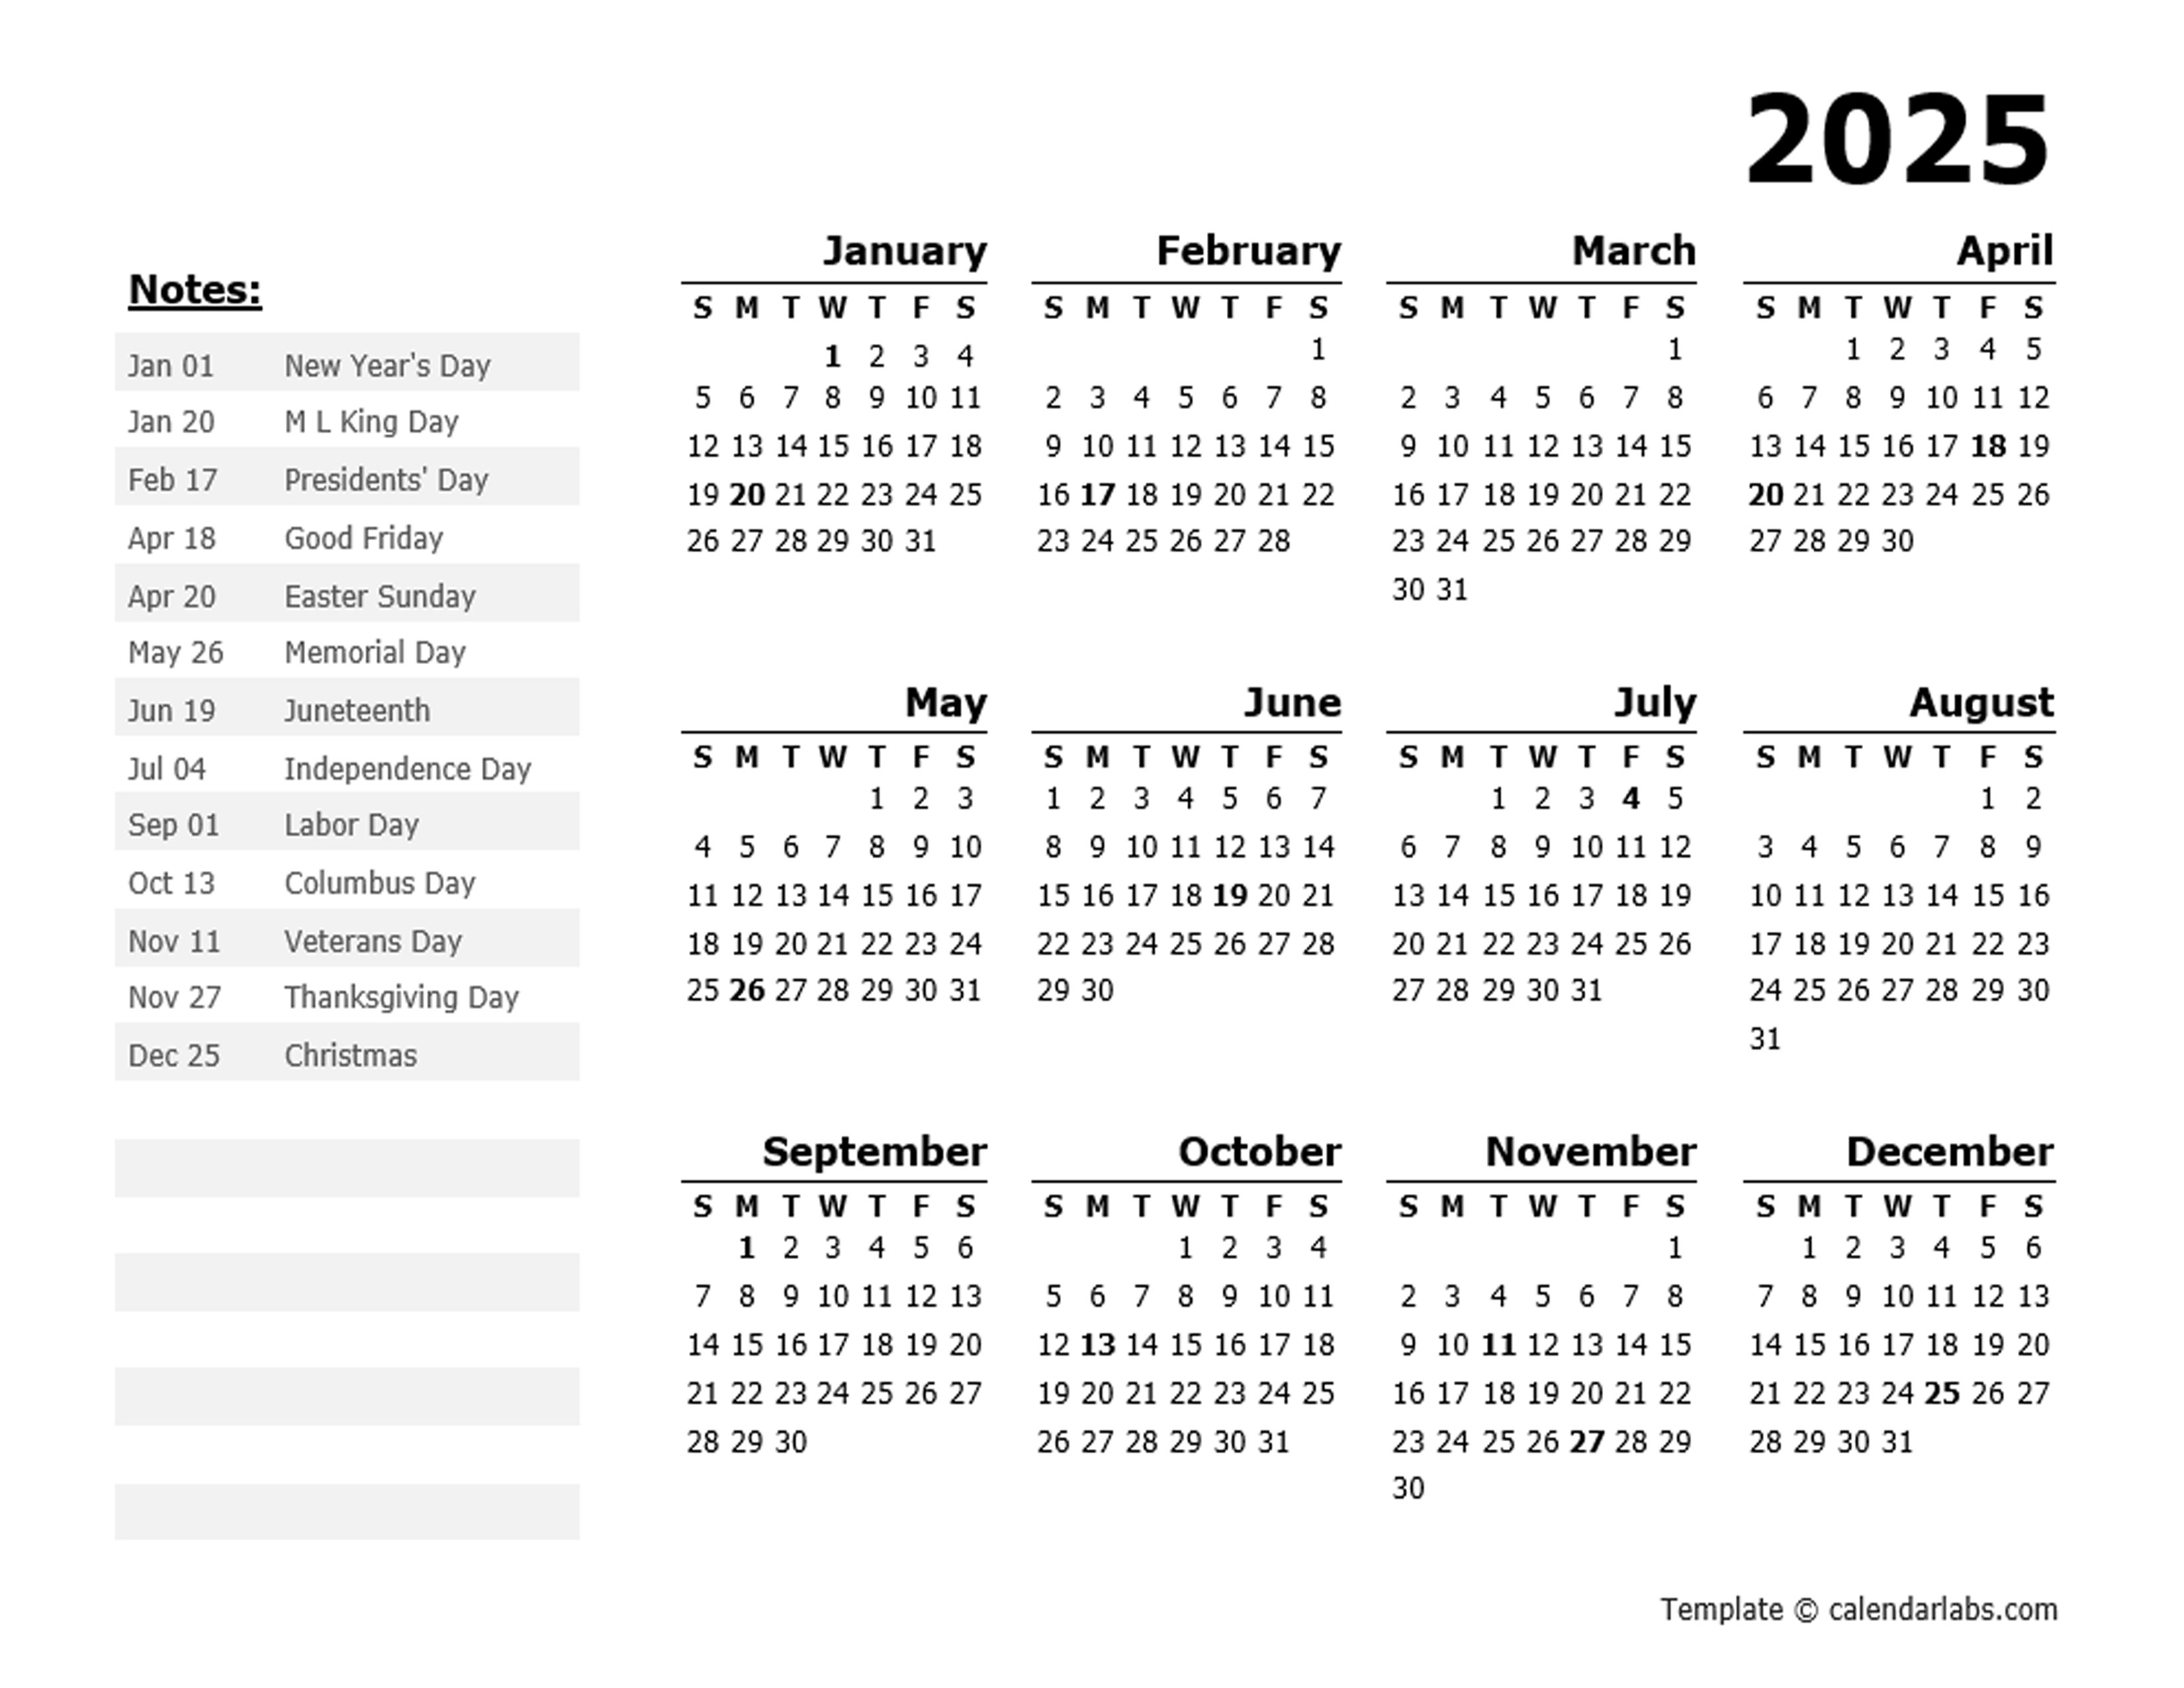 2025-calendar-with-us-holidays-at-bottom-landscape-layout